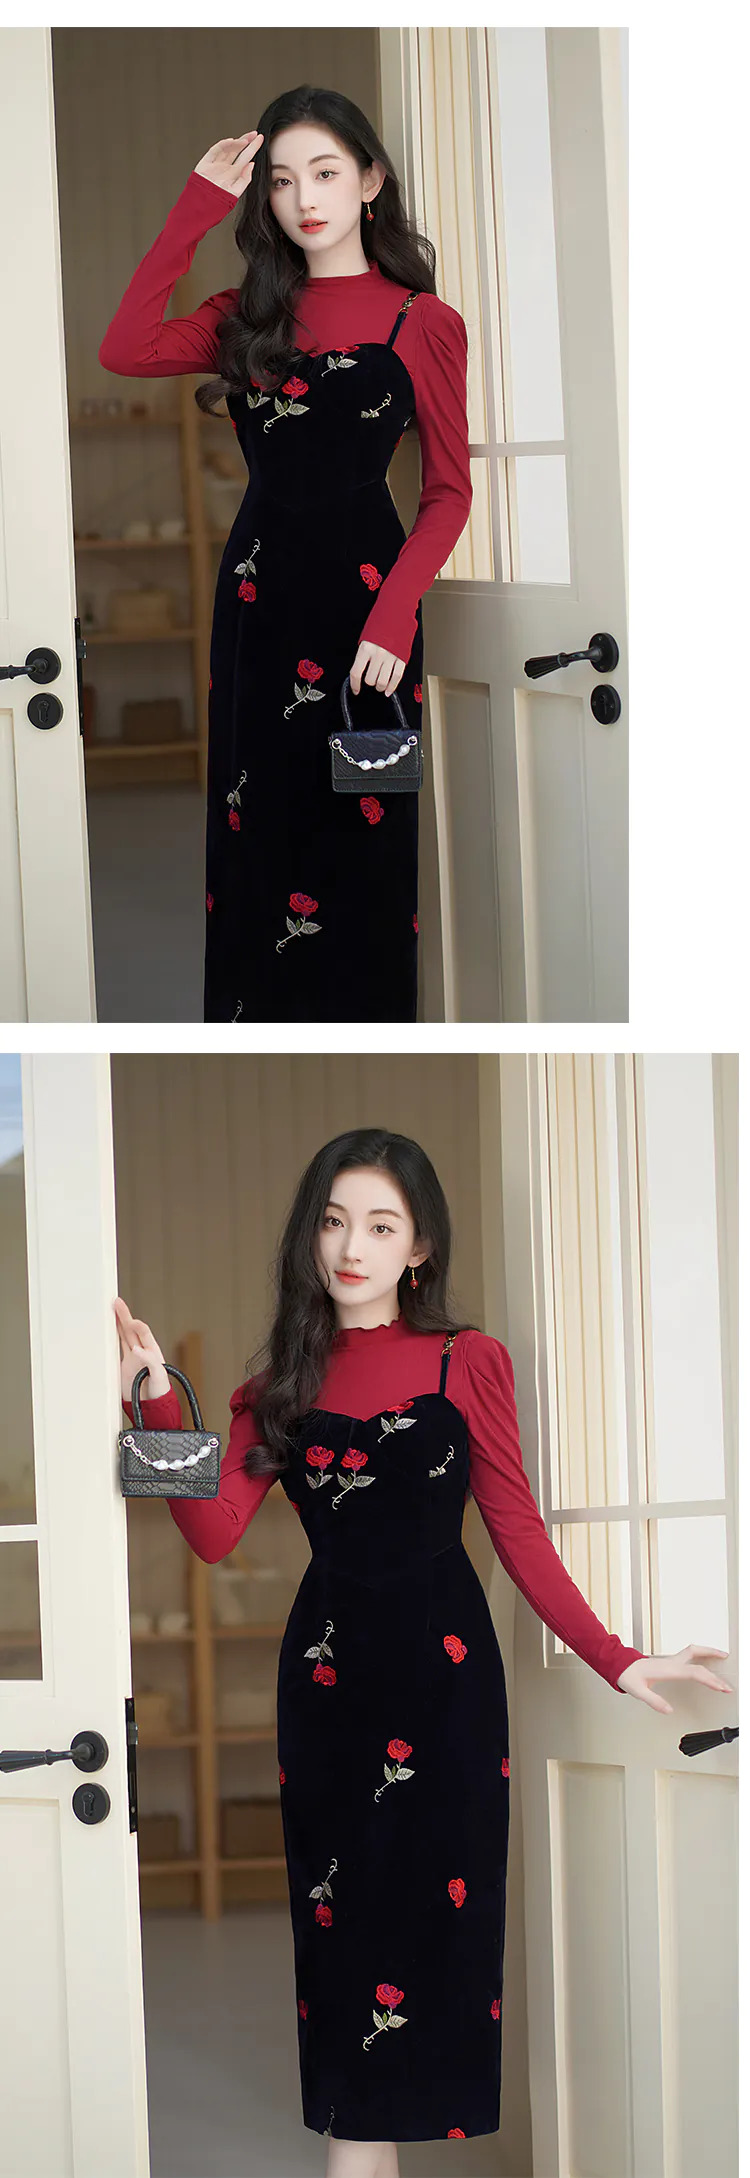 Sweet-Rose-Embroidery-Black-Slip-Dress-with-Red-Sweater-Casual-Outfit13